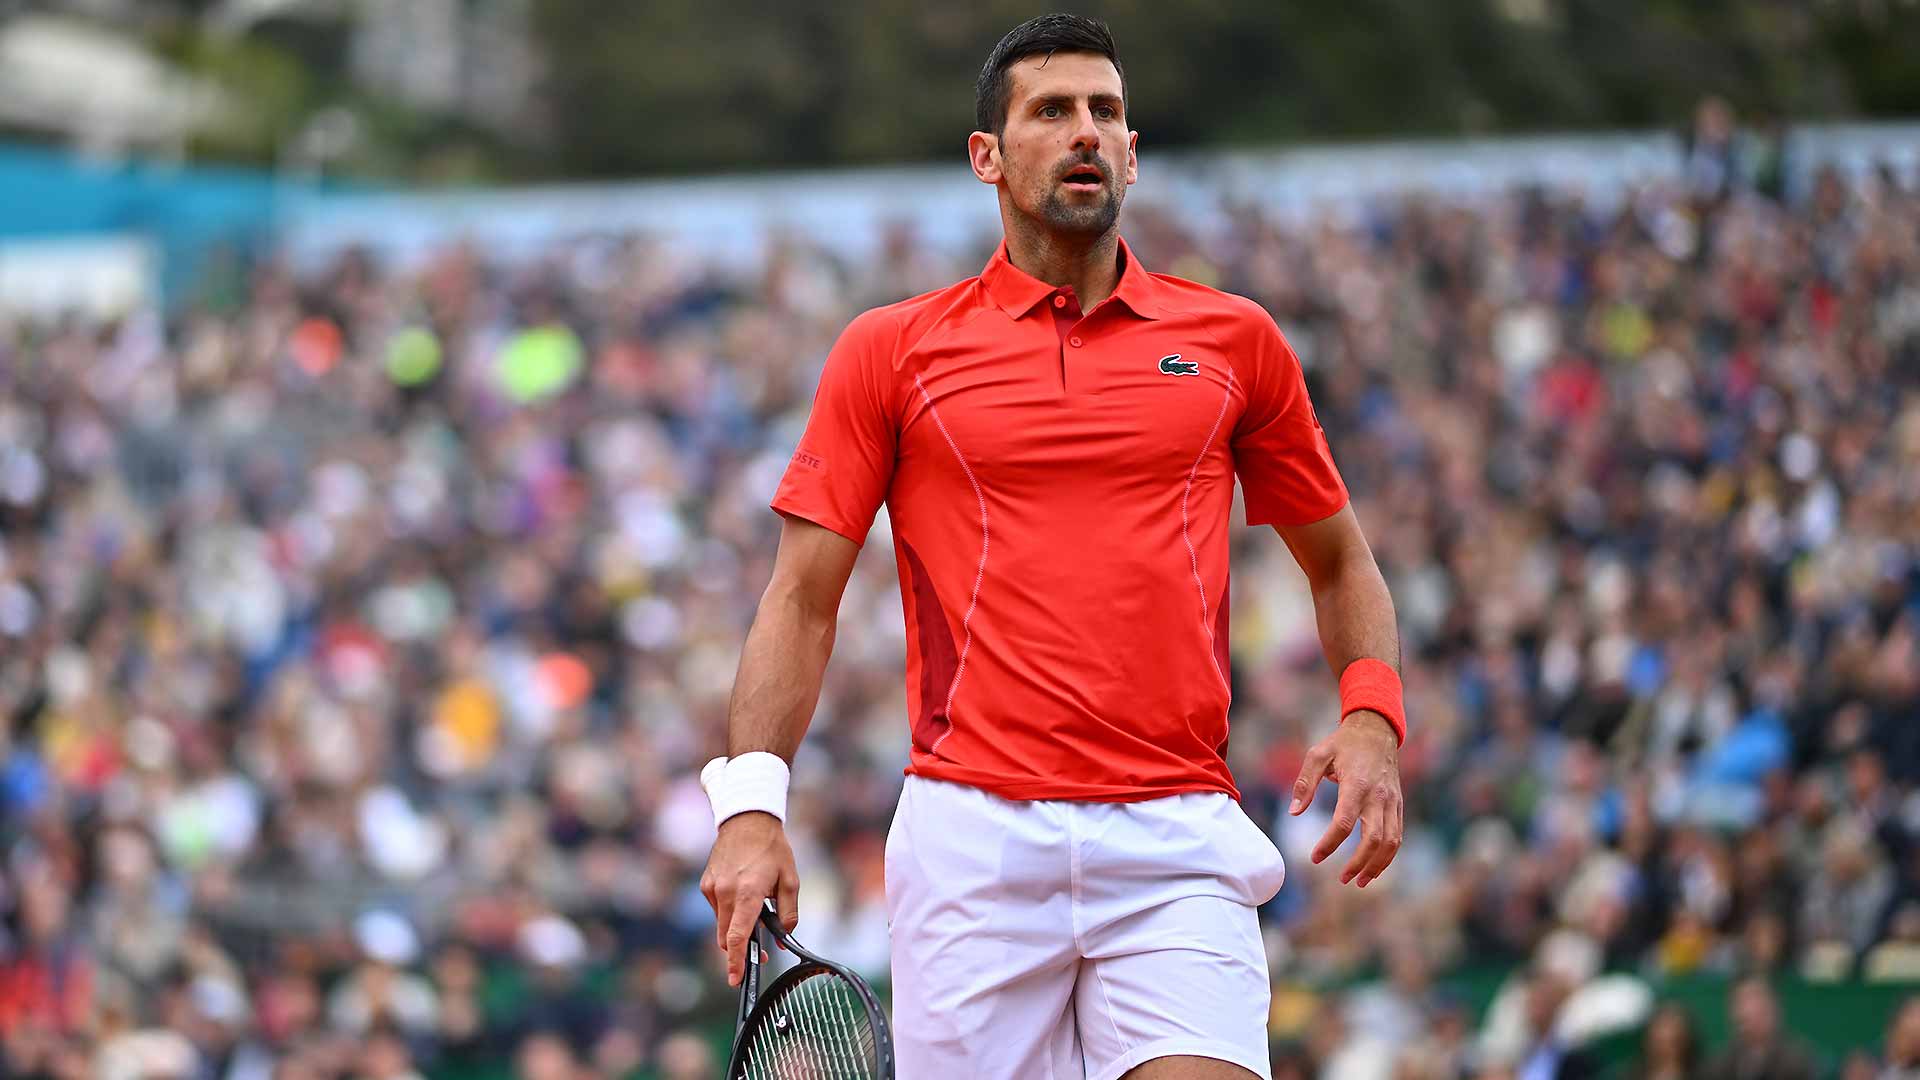 Djokovic: 'Let's not get ahead of ourselves'